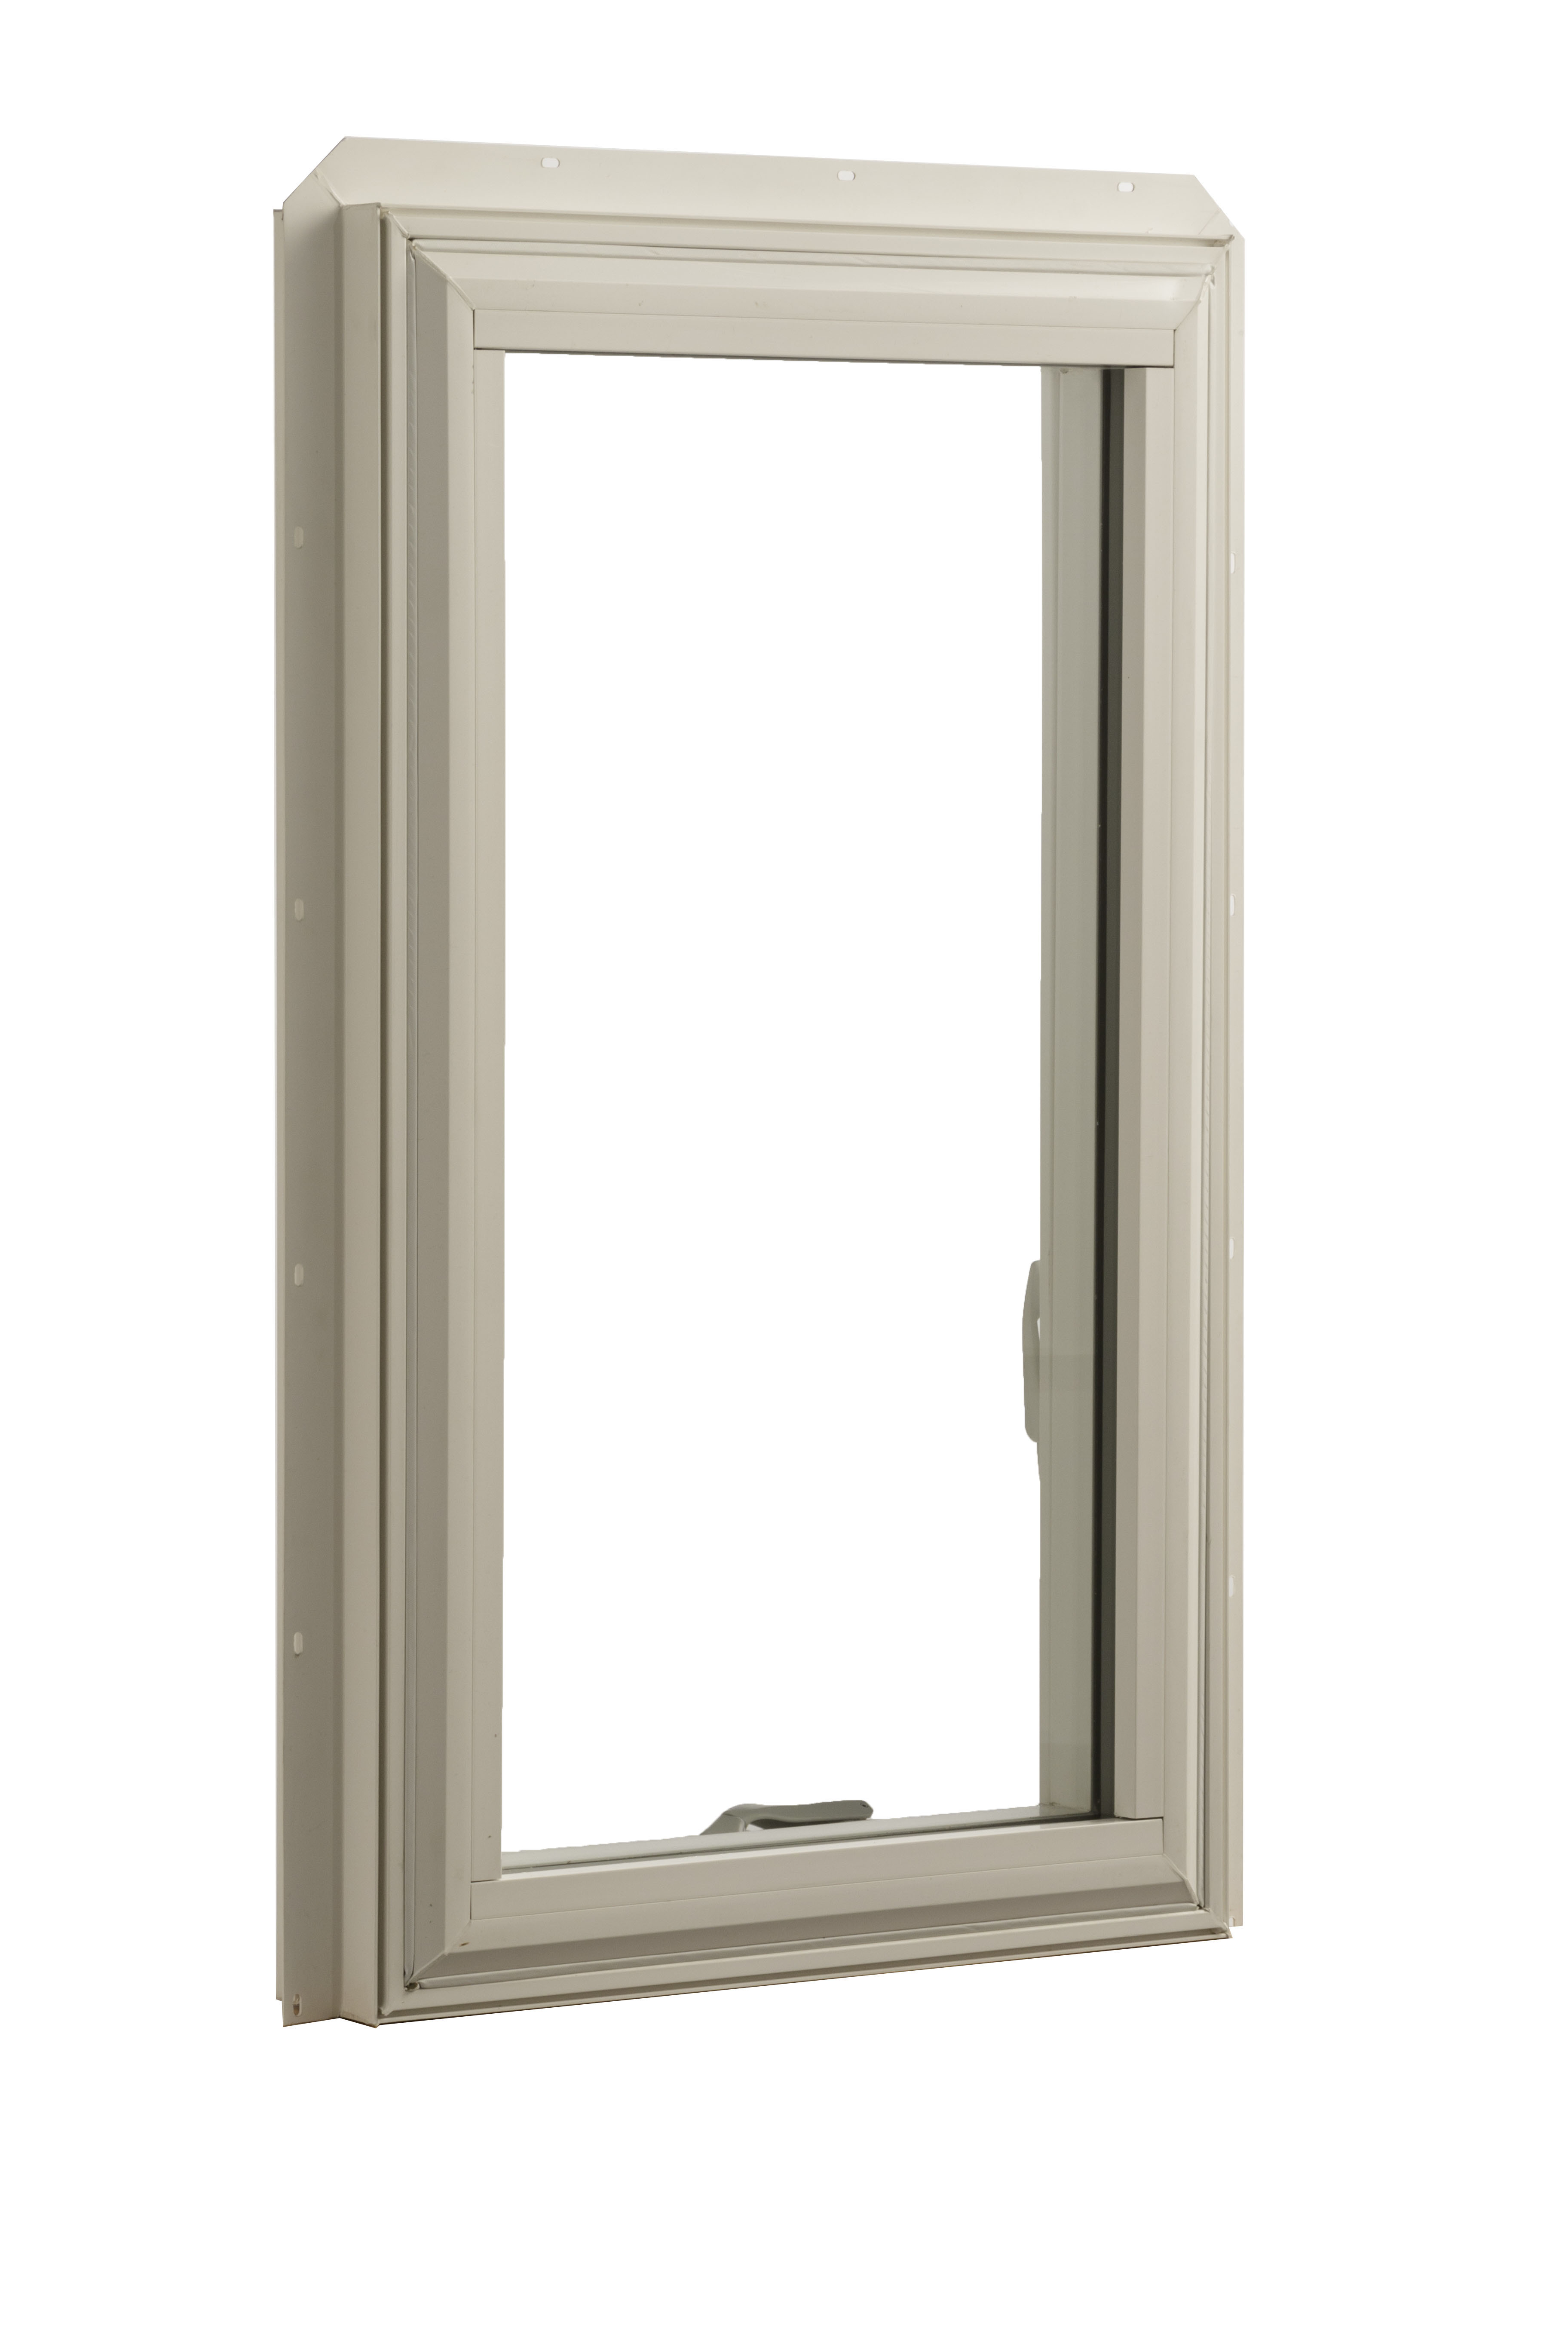 Isolated image of Envision Casement and Awning windows from Vector